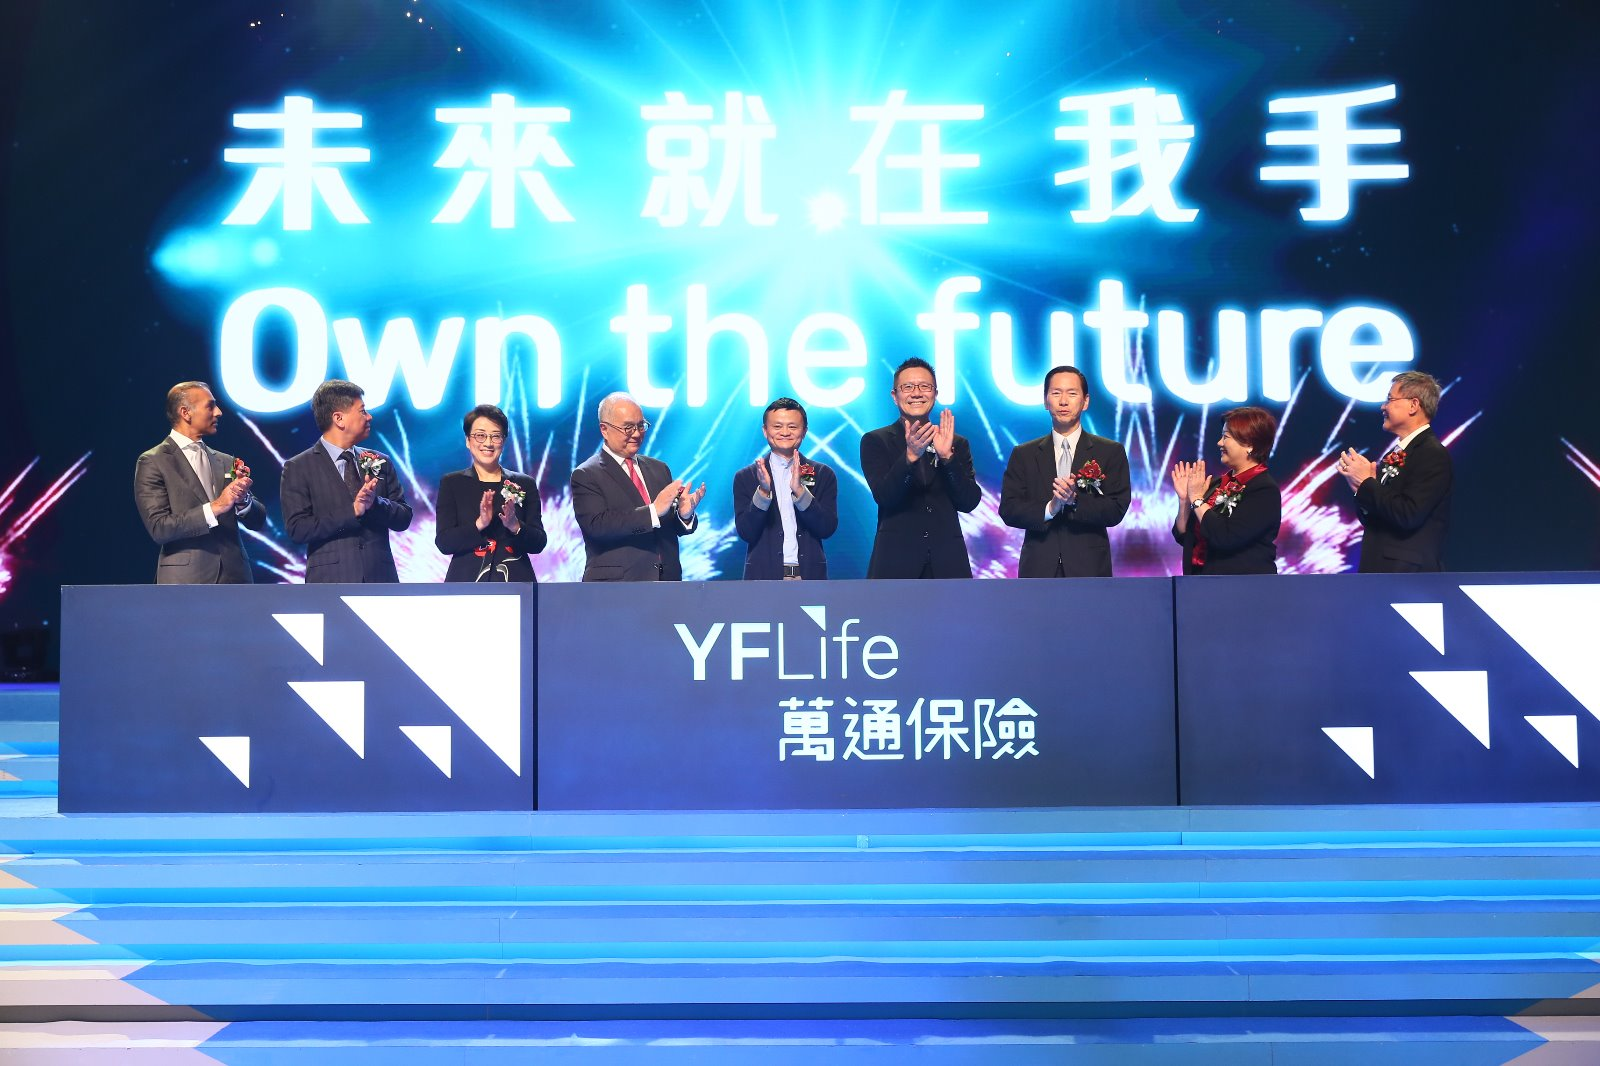 The nine Guests of Honor officiate YF Life New Brand Launch today (April 9),  marking a new era of the Company.